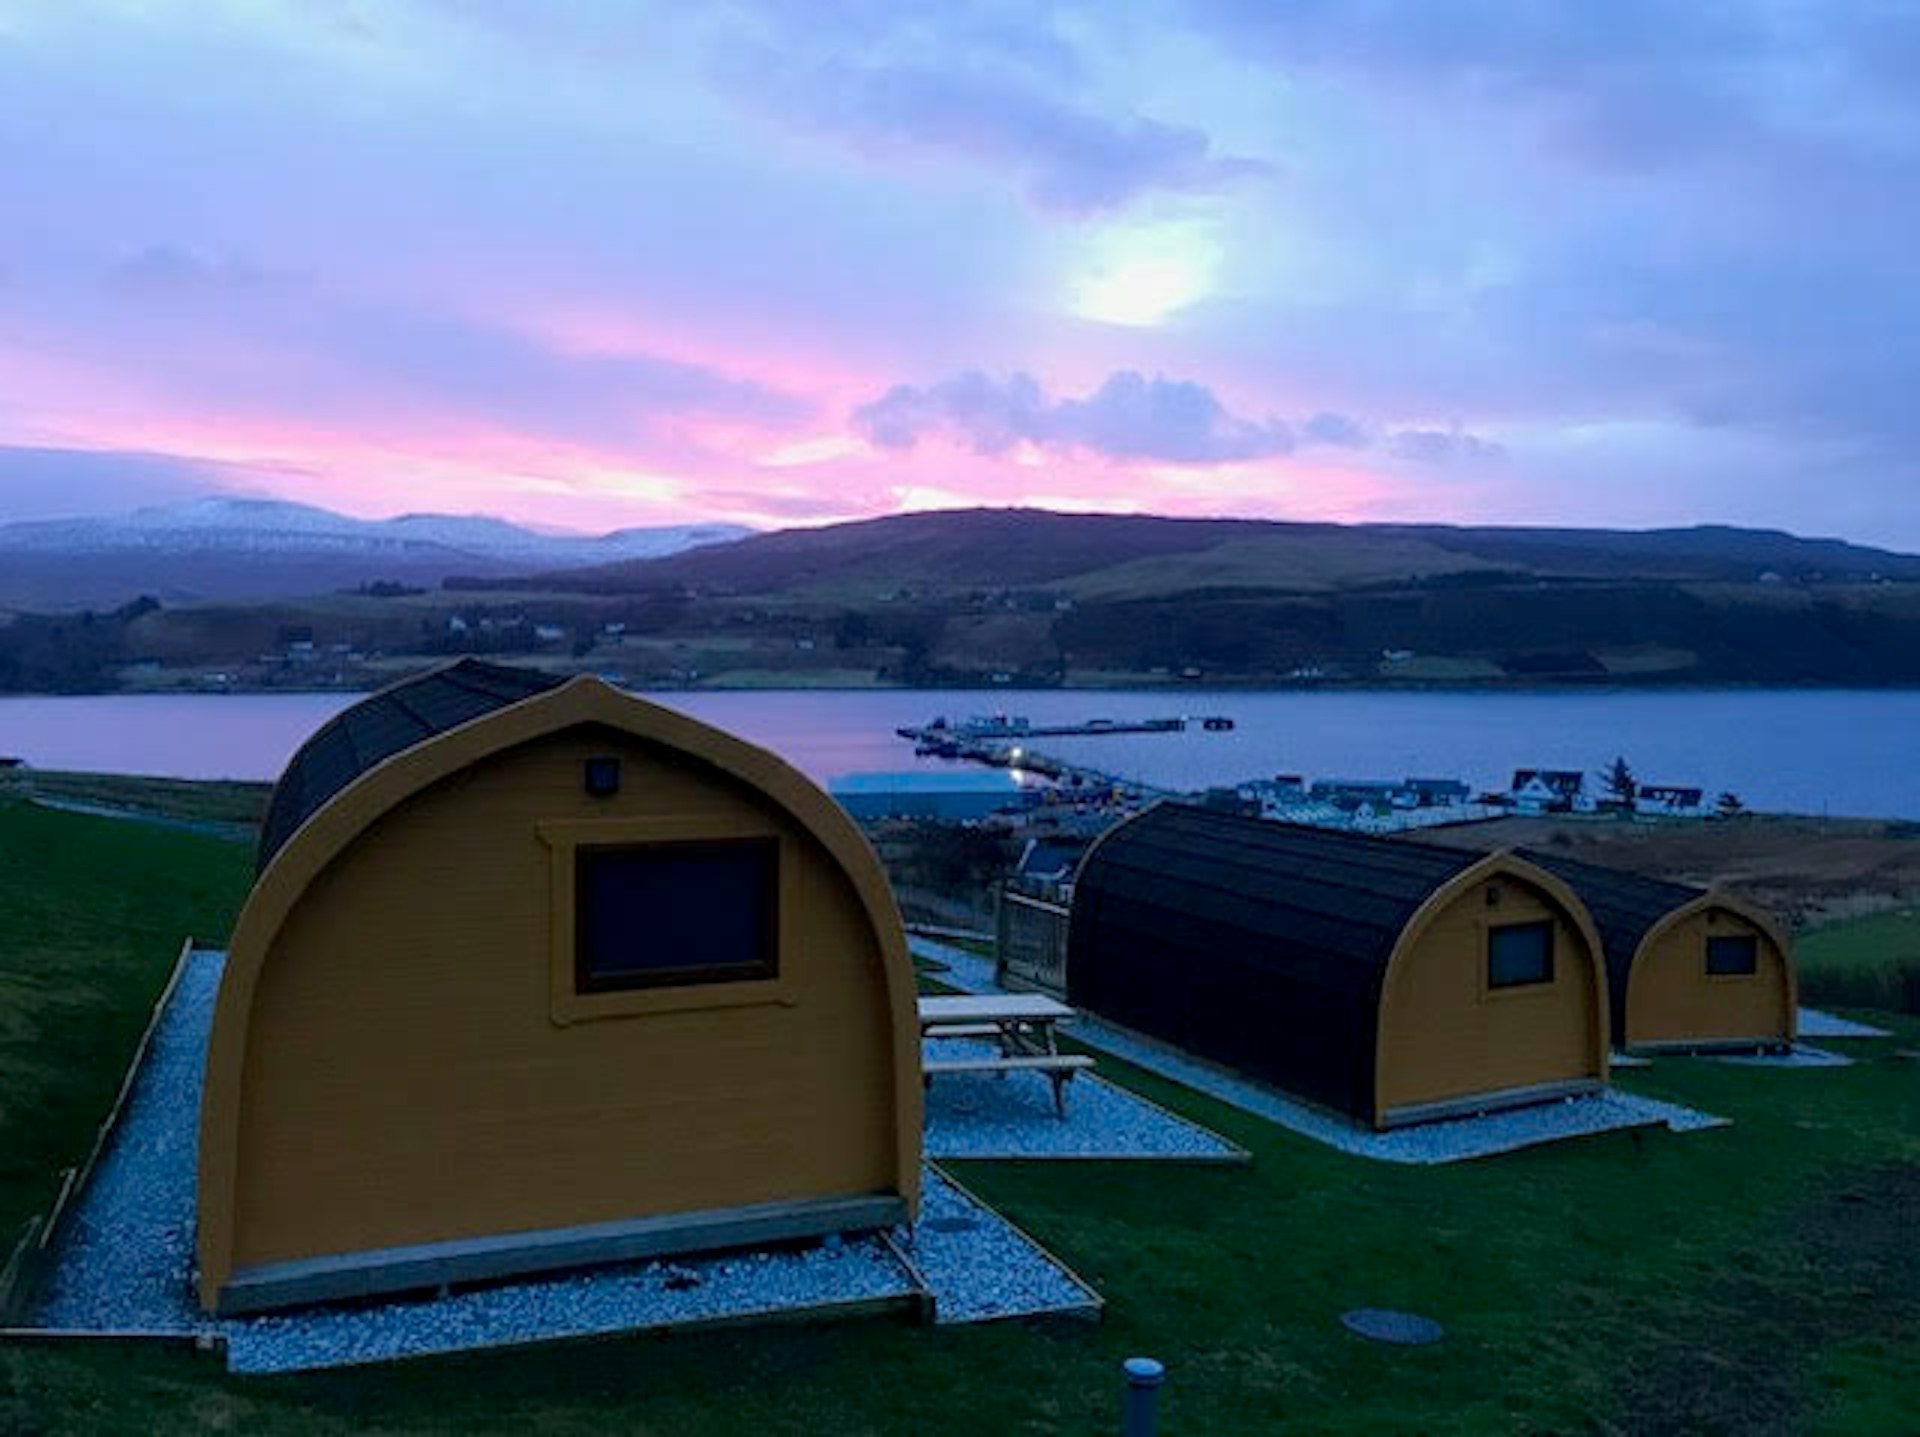 The back of three tiny wooden cabins facing a body of water with the sun rising beyond the hills